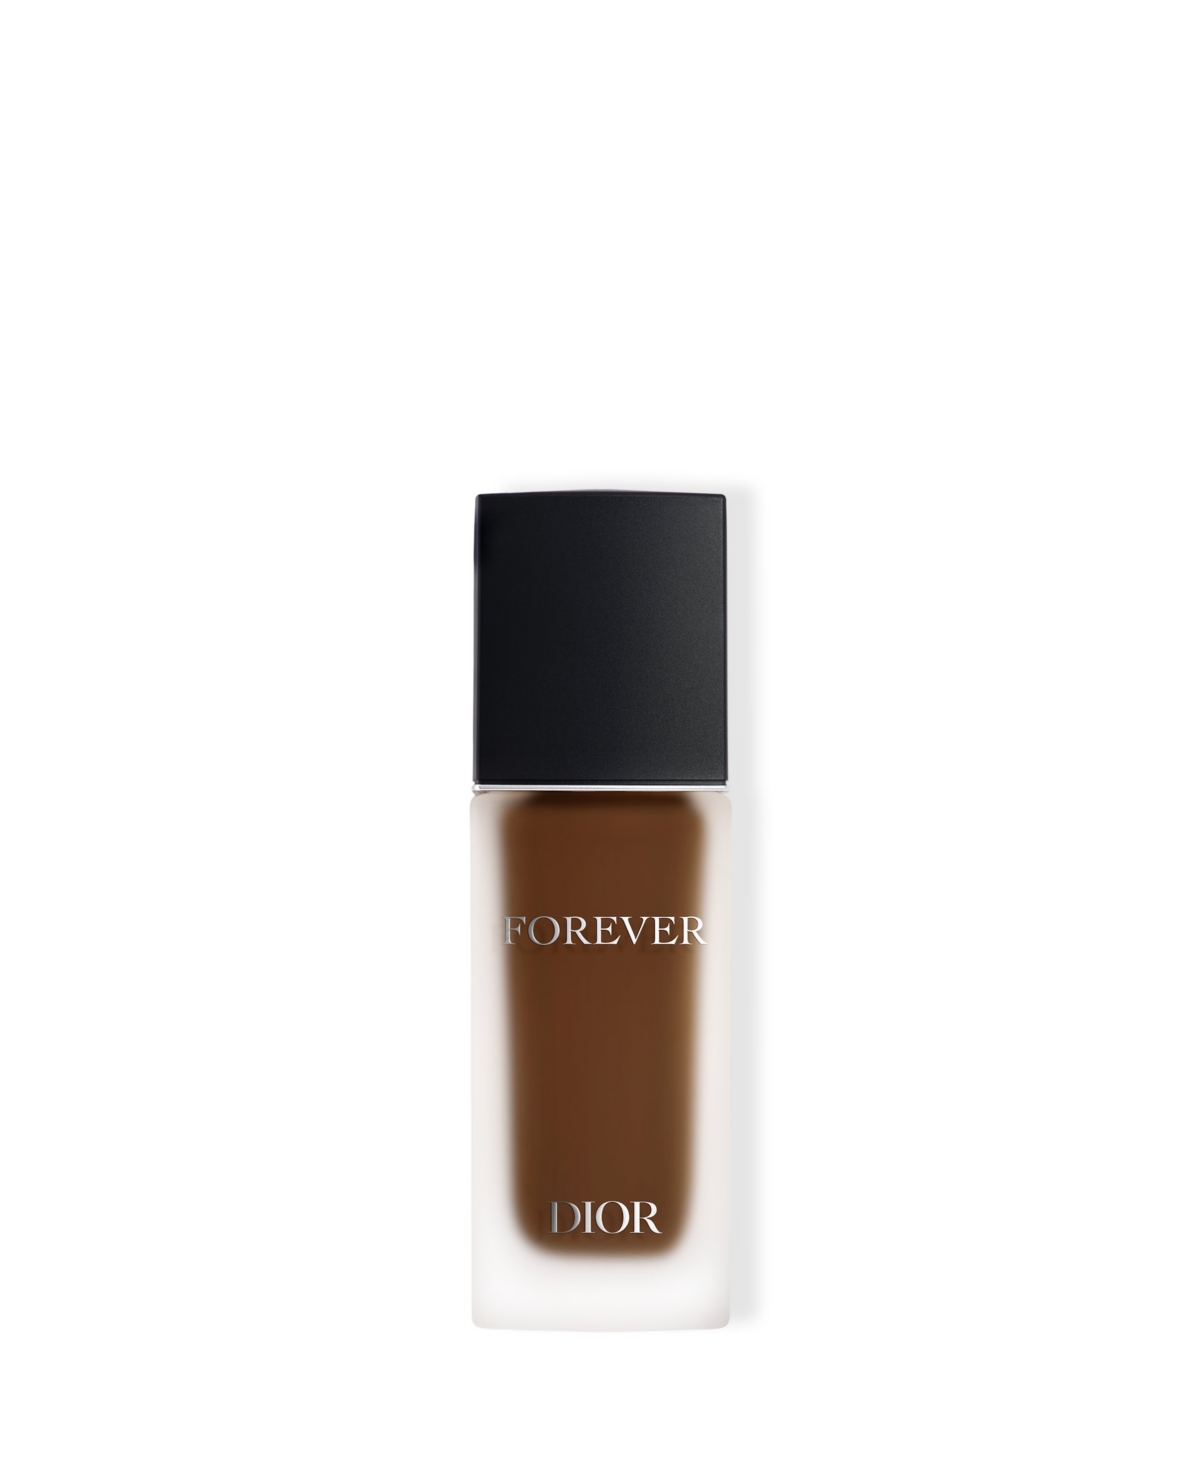 Dior Forever Matte Skincare Foundation Spf 15 In Neutral (deep Skin With Neutral Underton